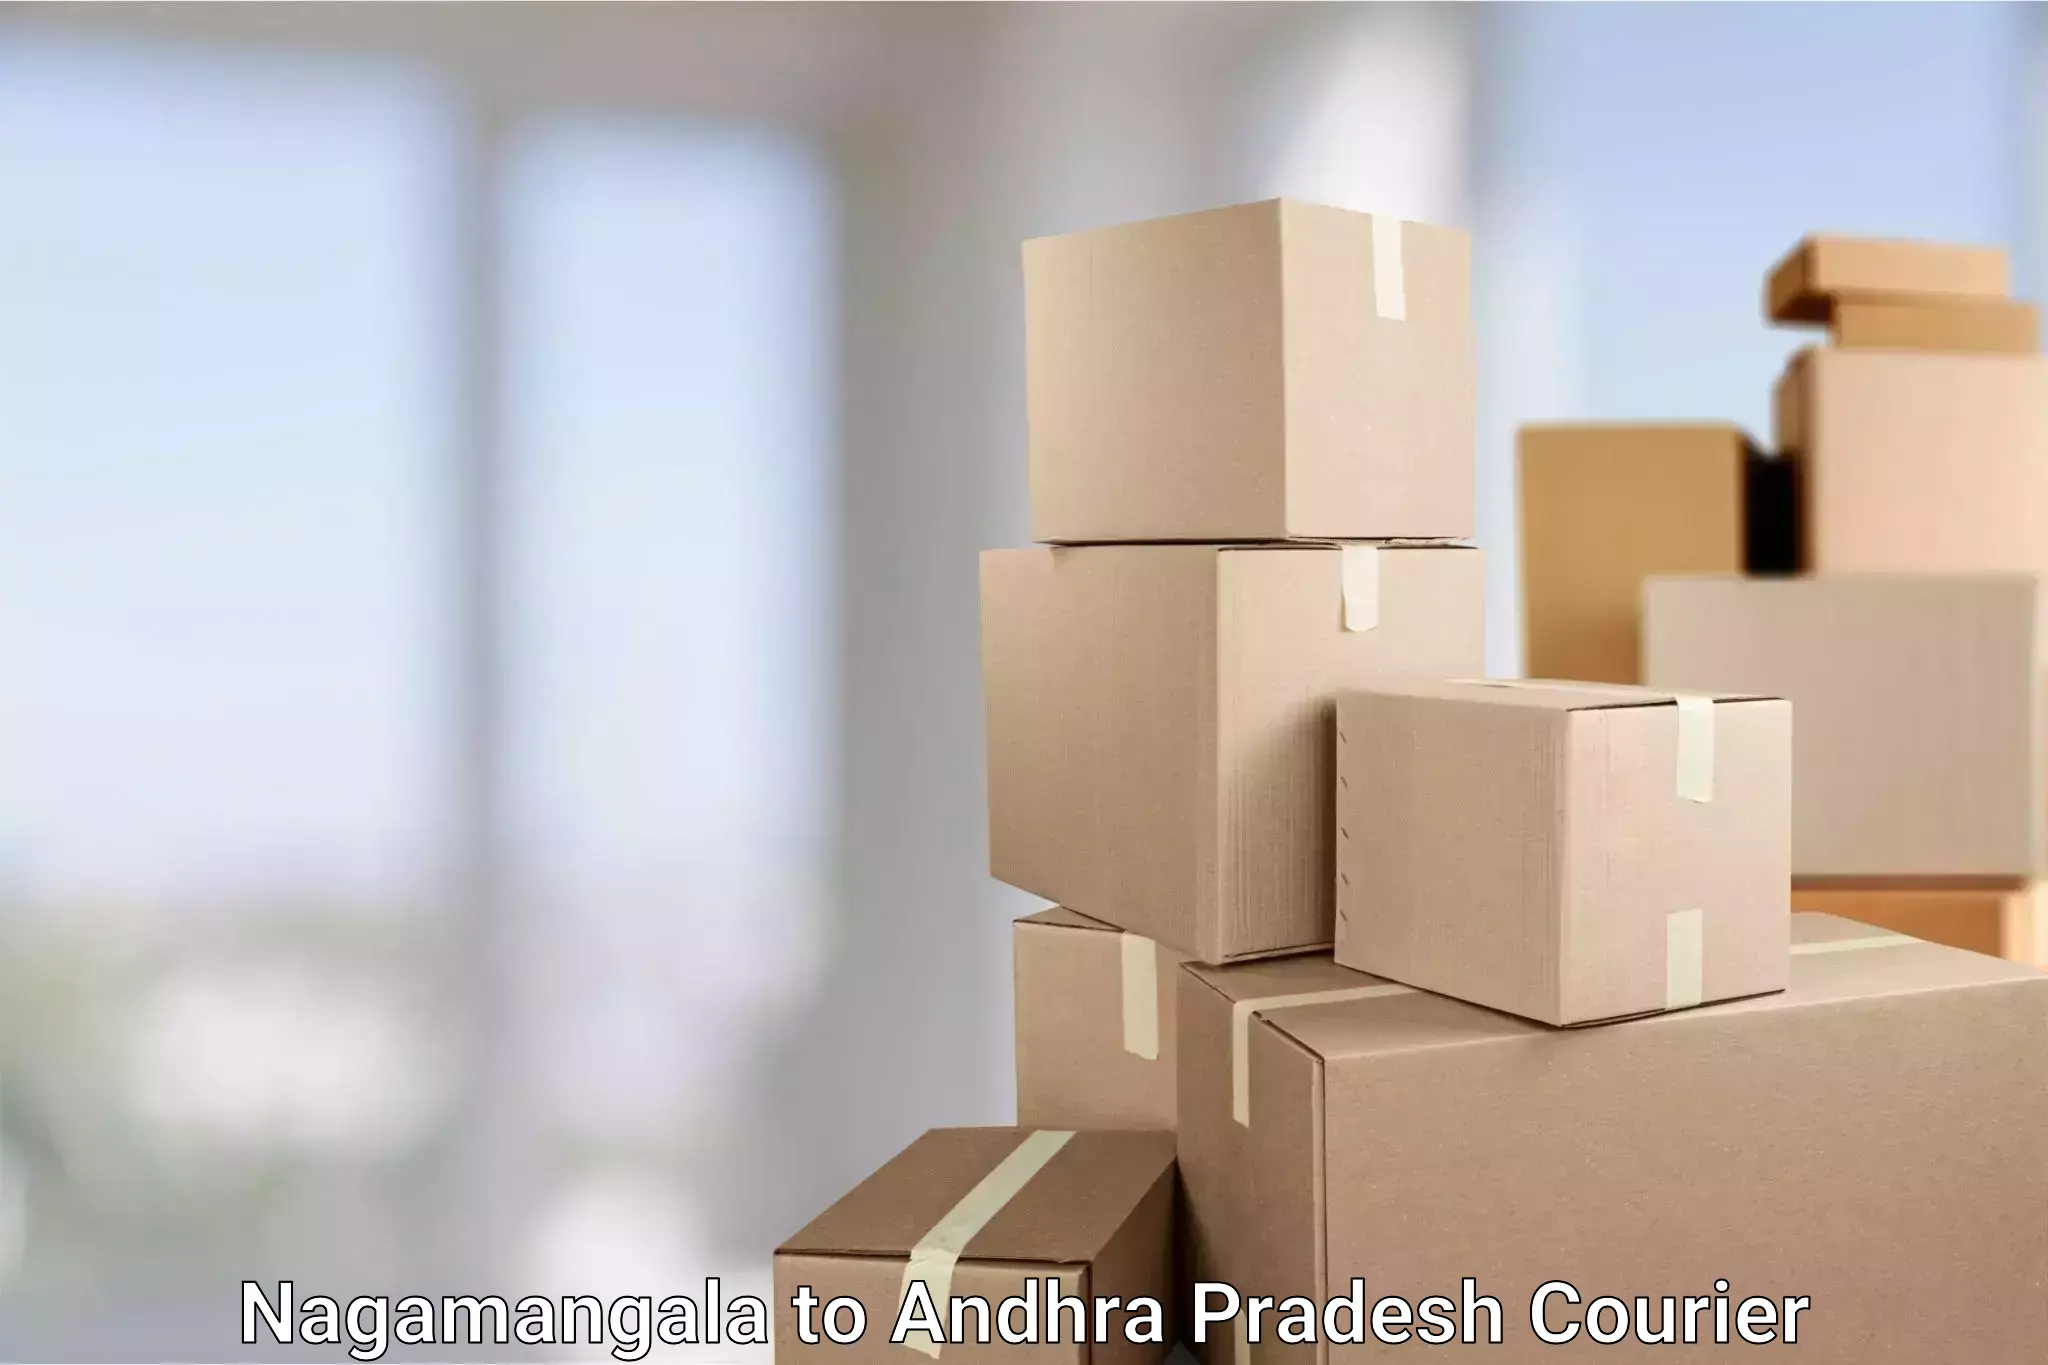 State-of-the-art courier technology Nagamangala to Andhra Pradesh